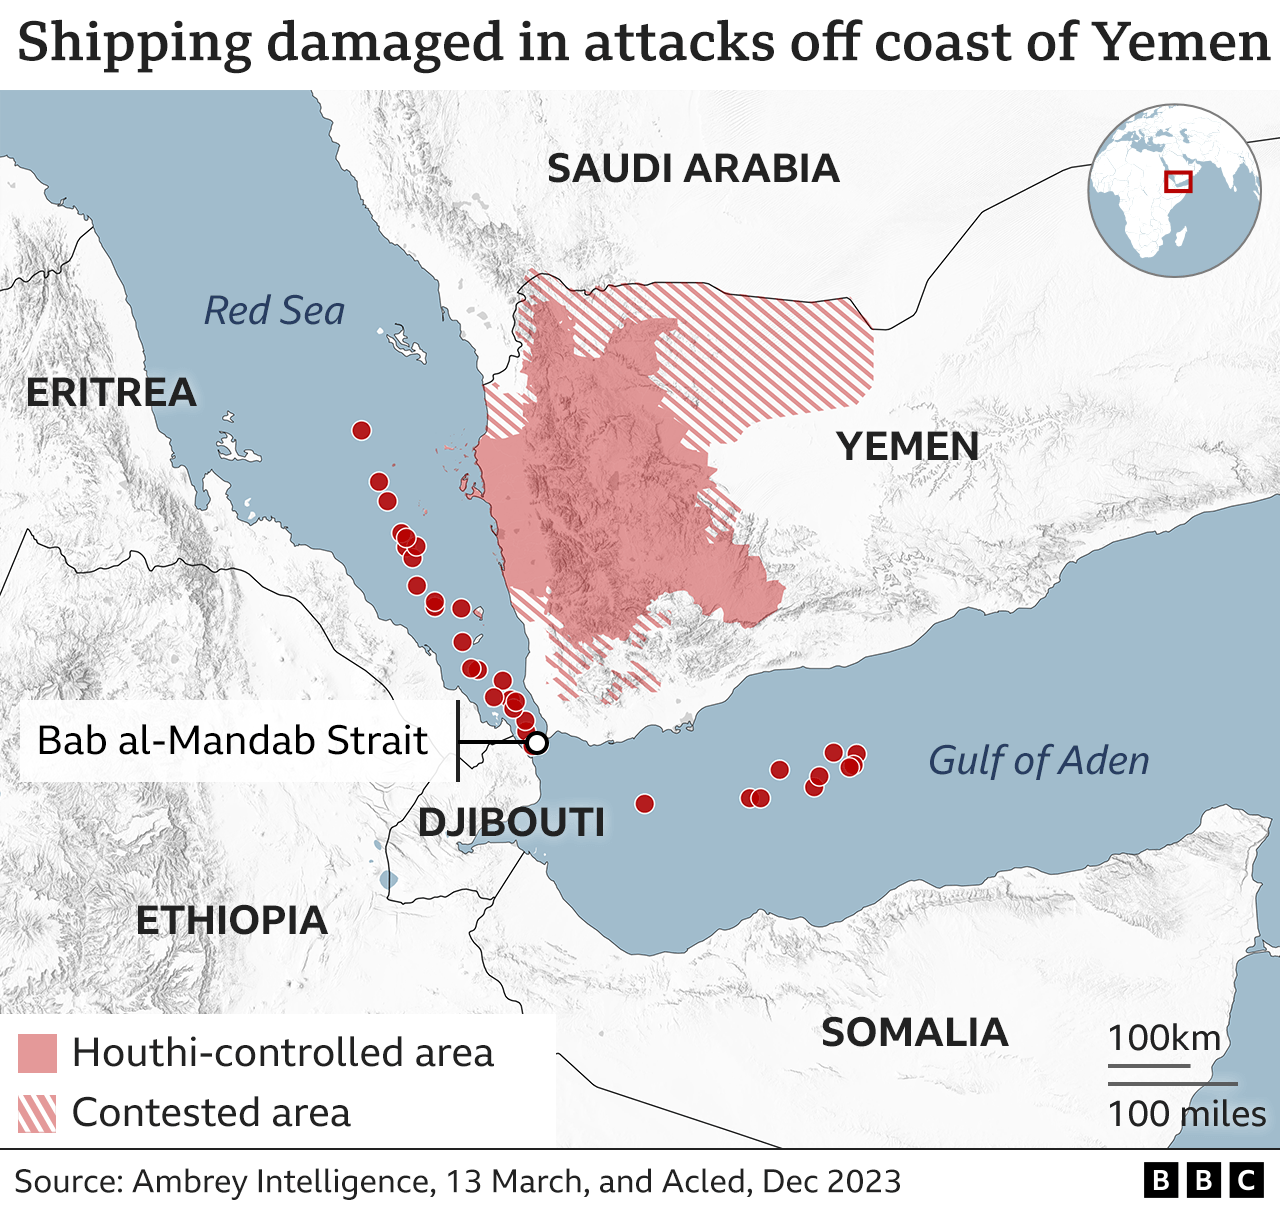 Map showing shipping damaged in Houthi attacks off the coast of Yemen, in Red Sea and Gulf of Aden